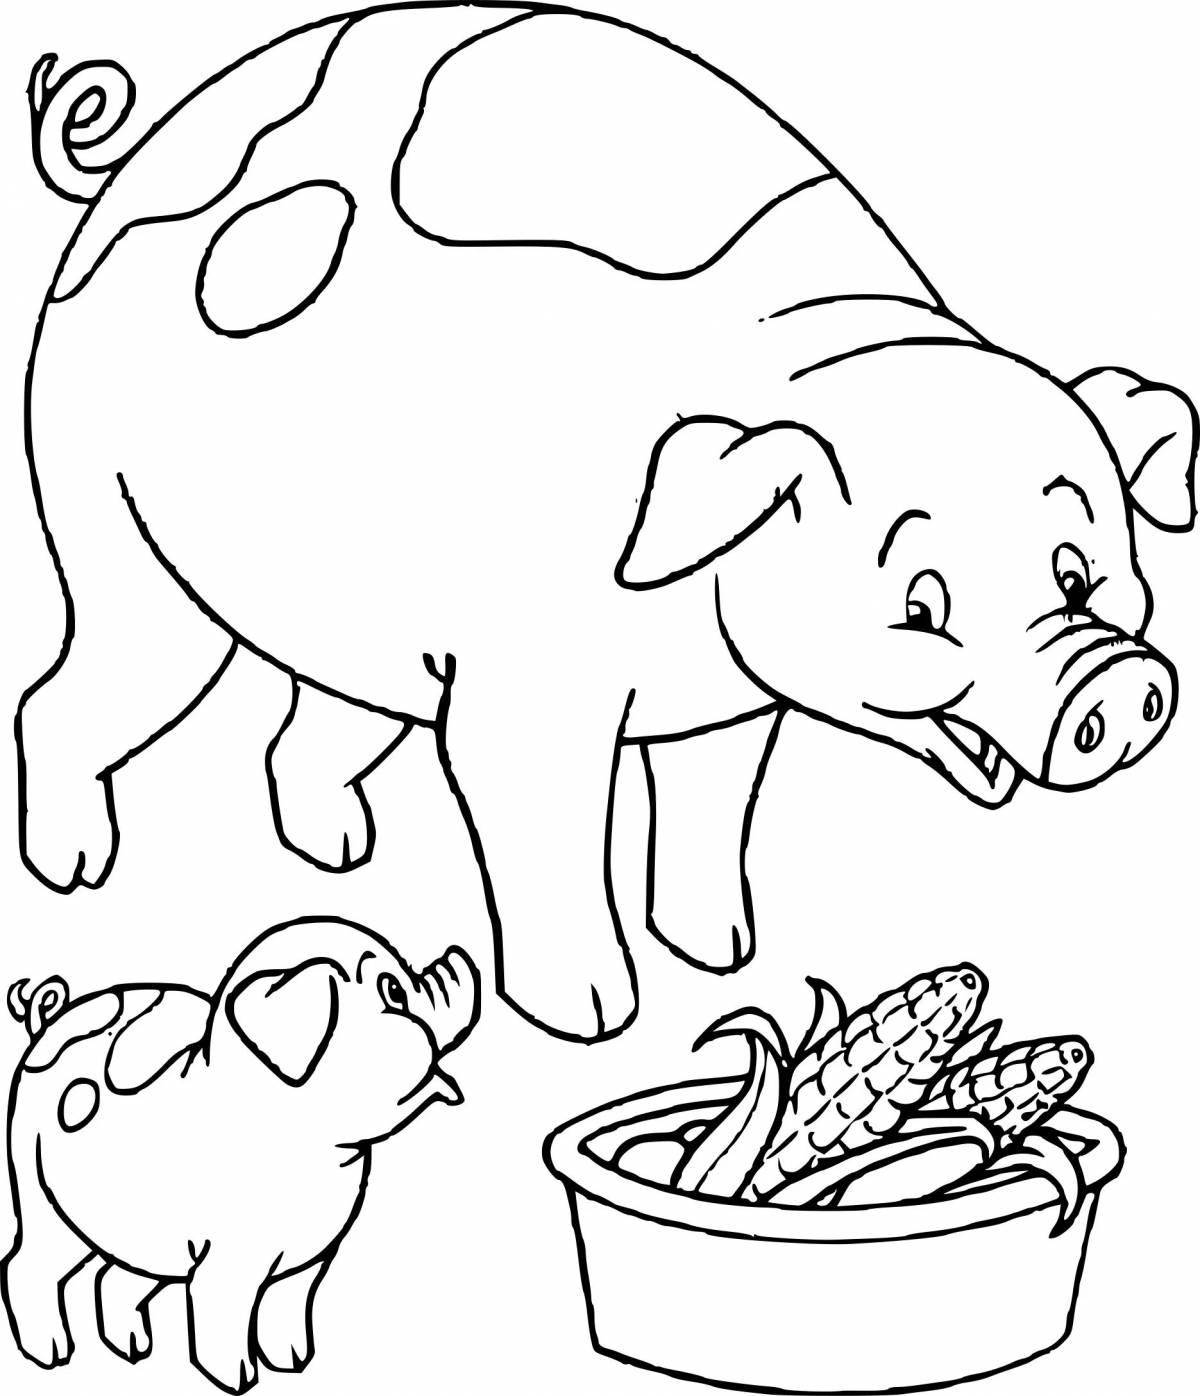 Adorable pets coloring book for kids 5-6 years old